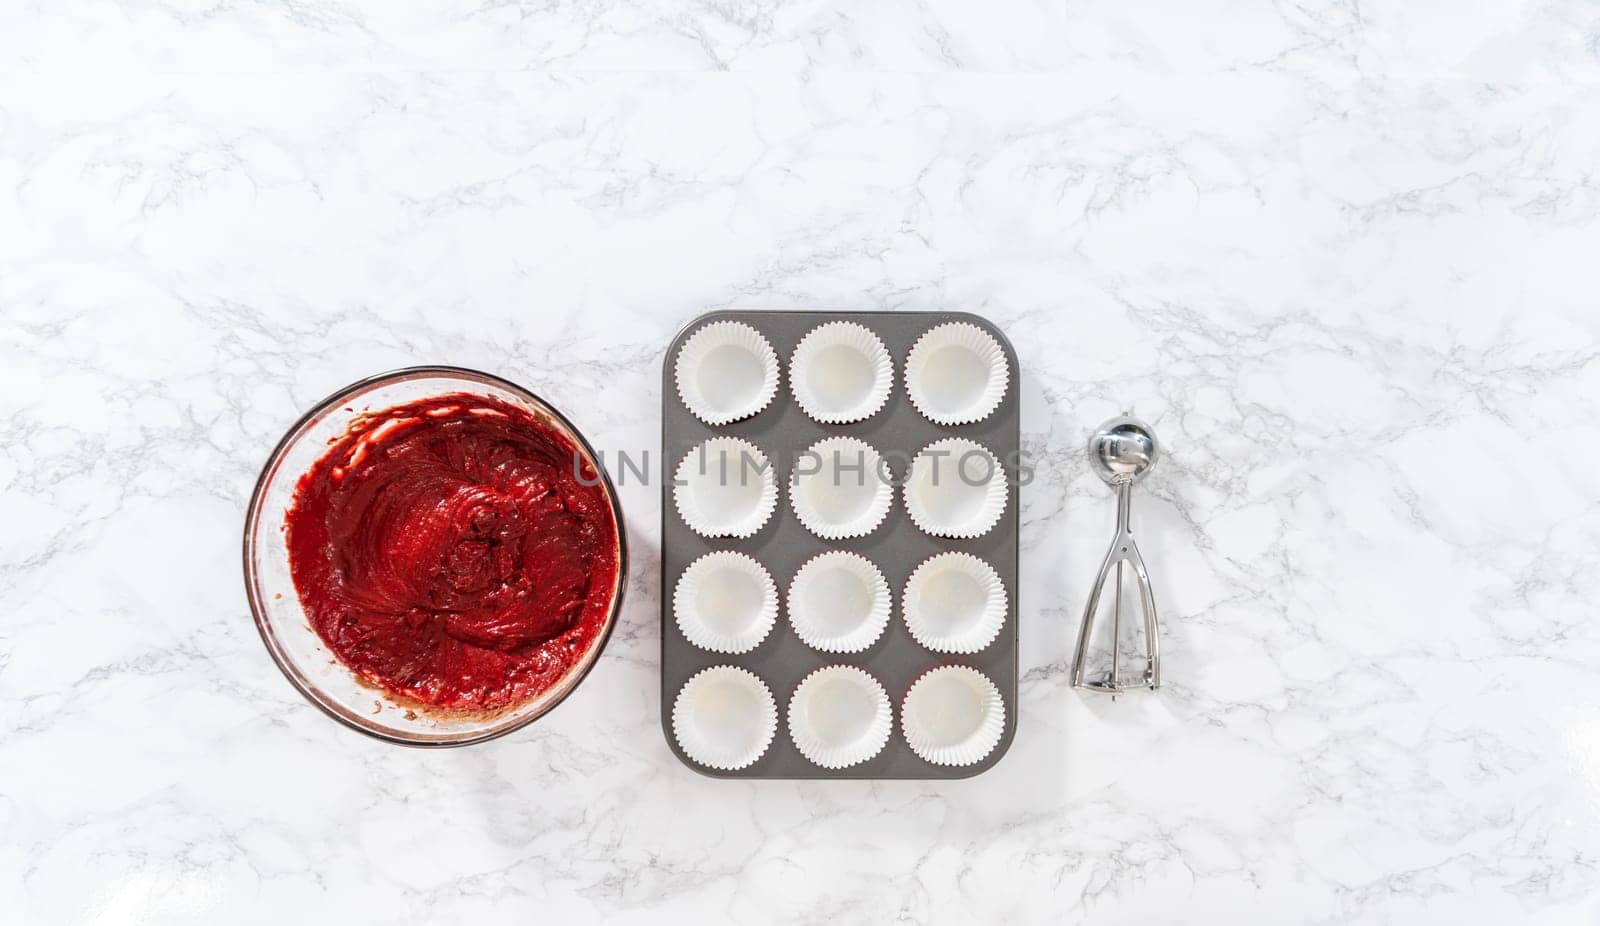 Flat lay. Scooping cupcake dough with dough scoop into cupcake pan lined with foil liners to bake red velvet cupcakes with white chocolate ganache frosting.